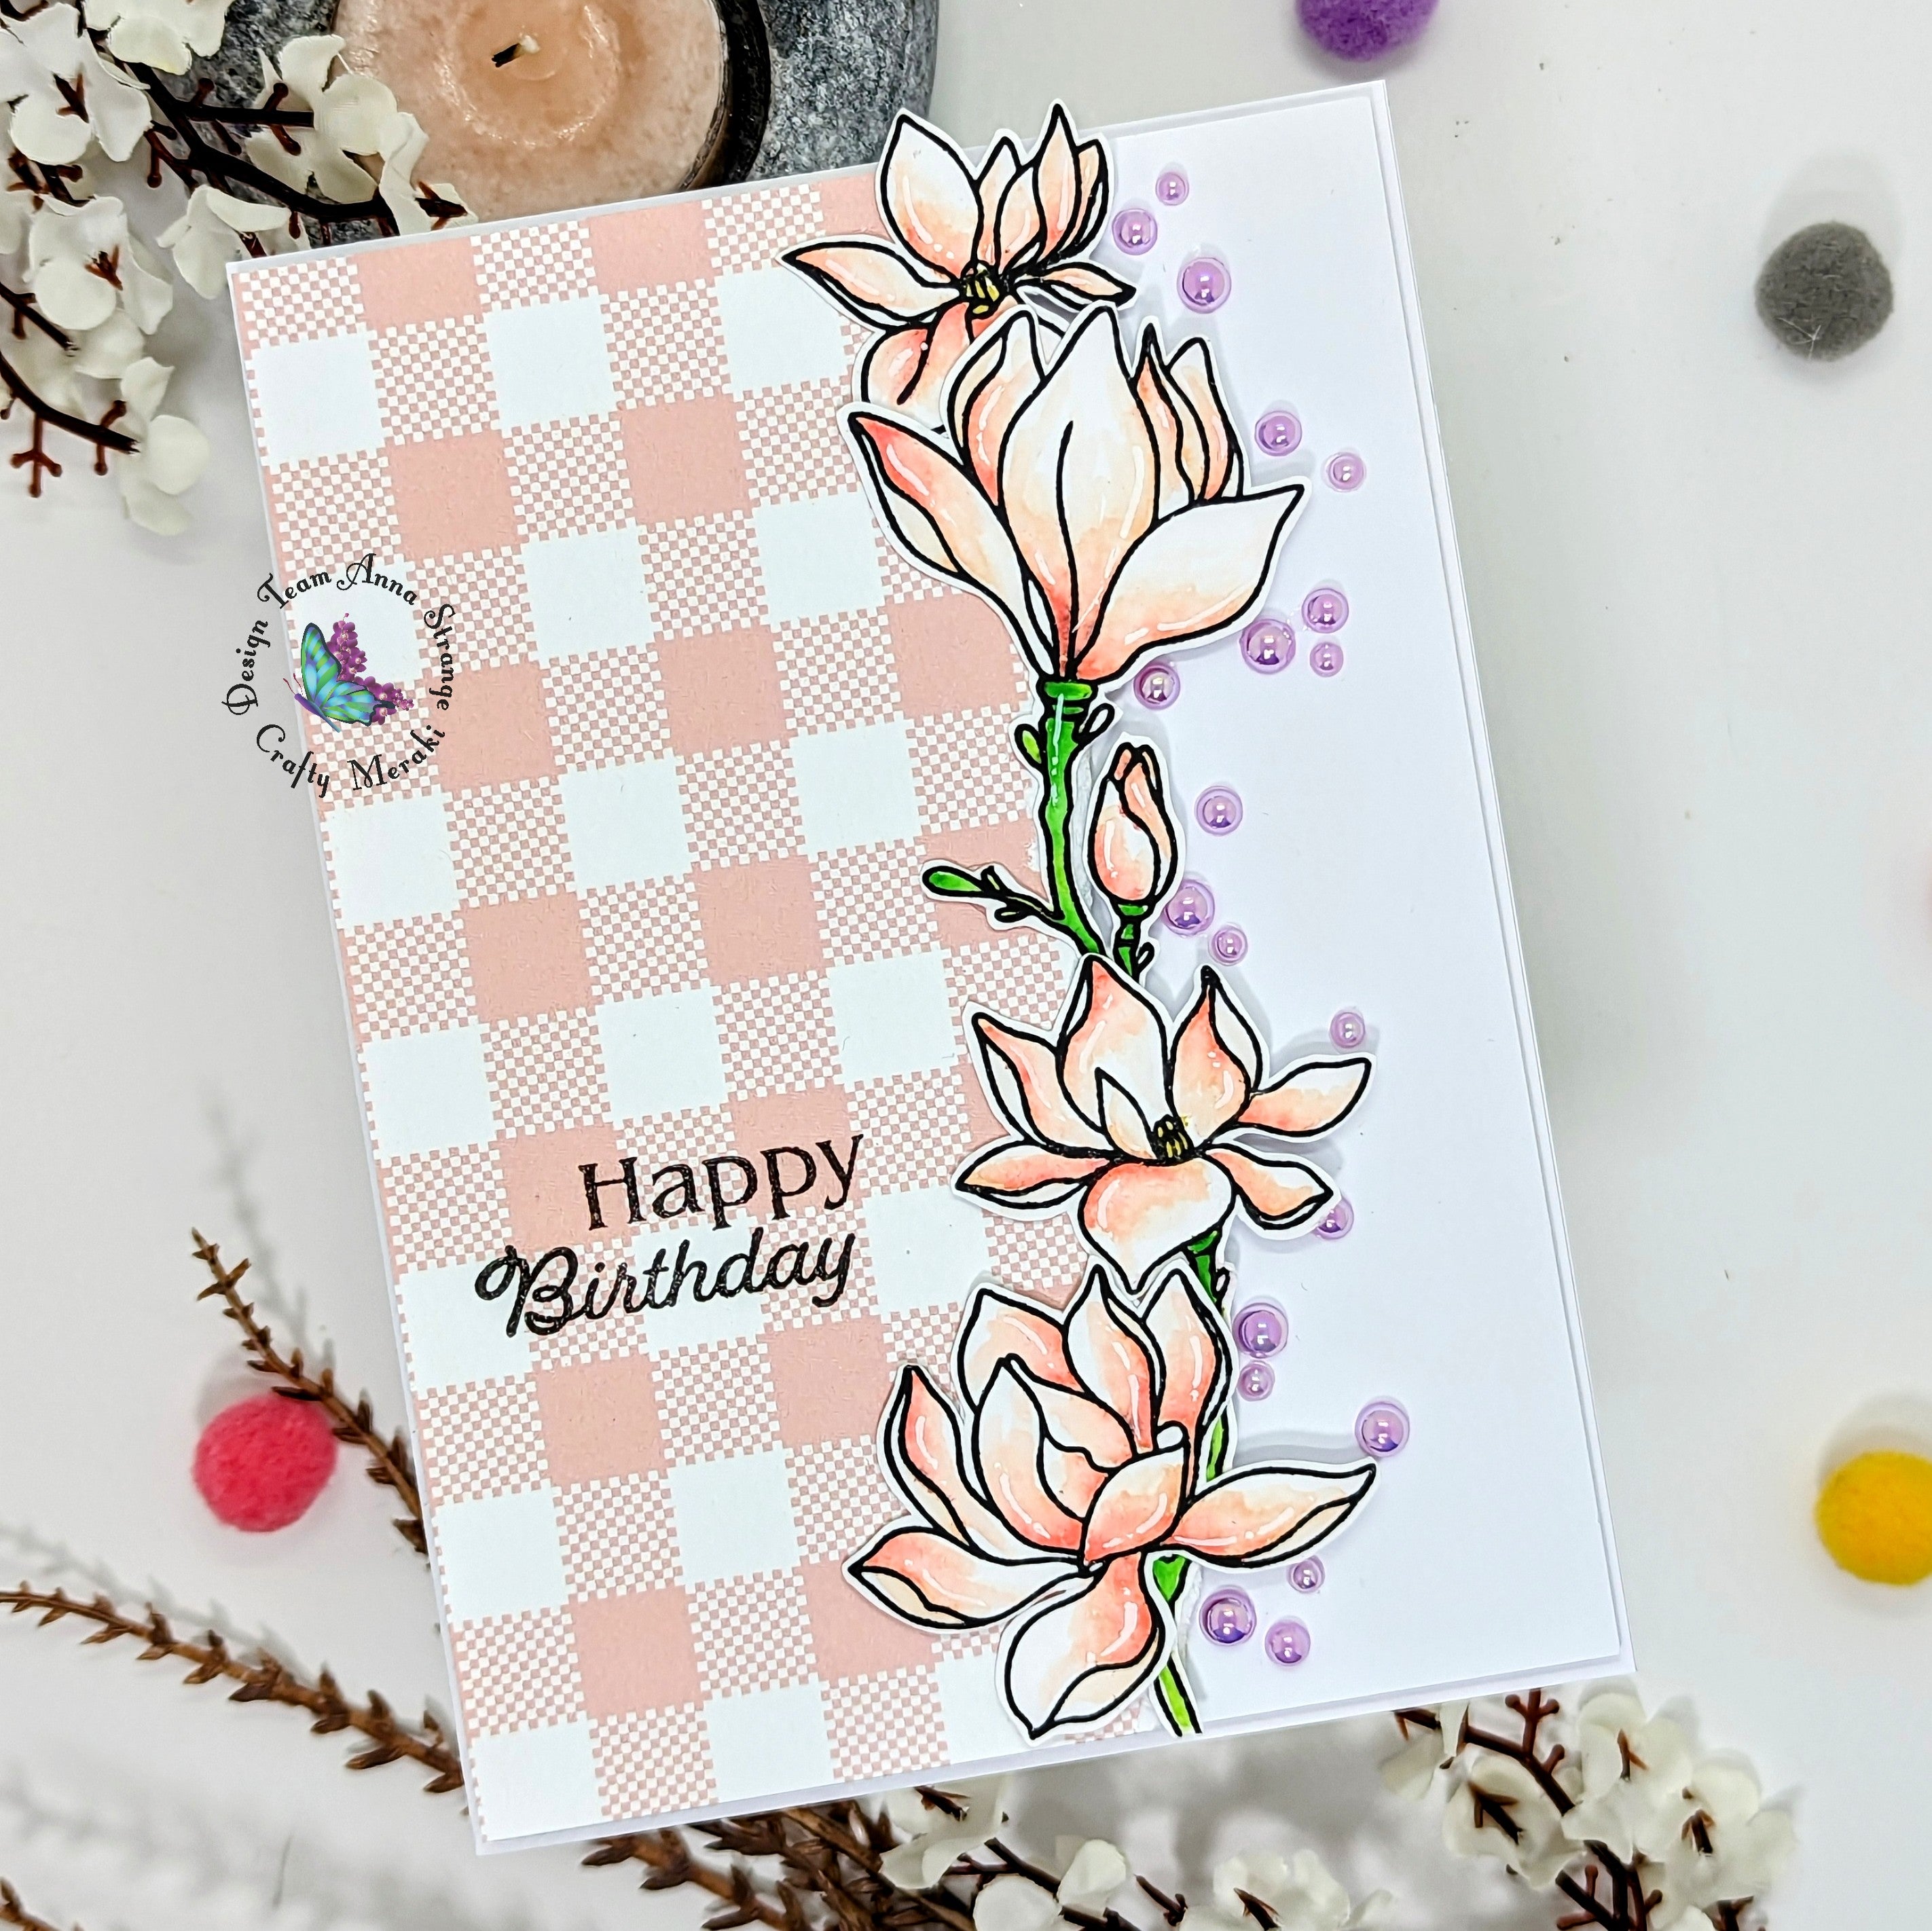 Combining pattern paper and stamps by Anna